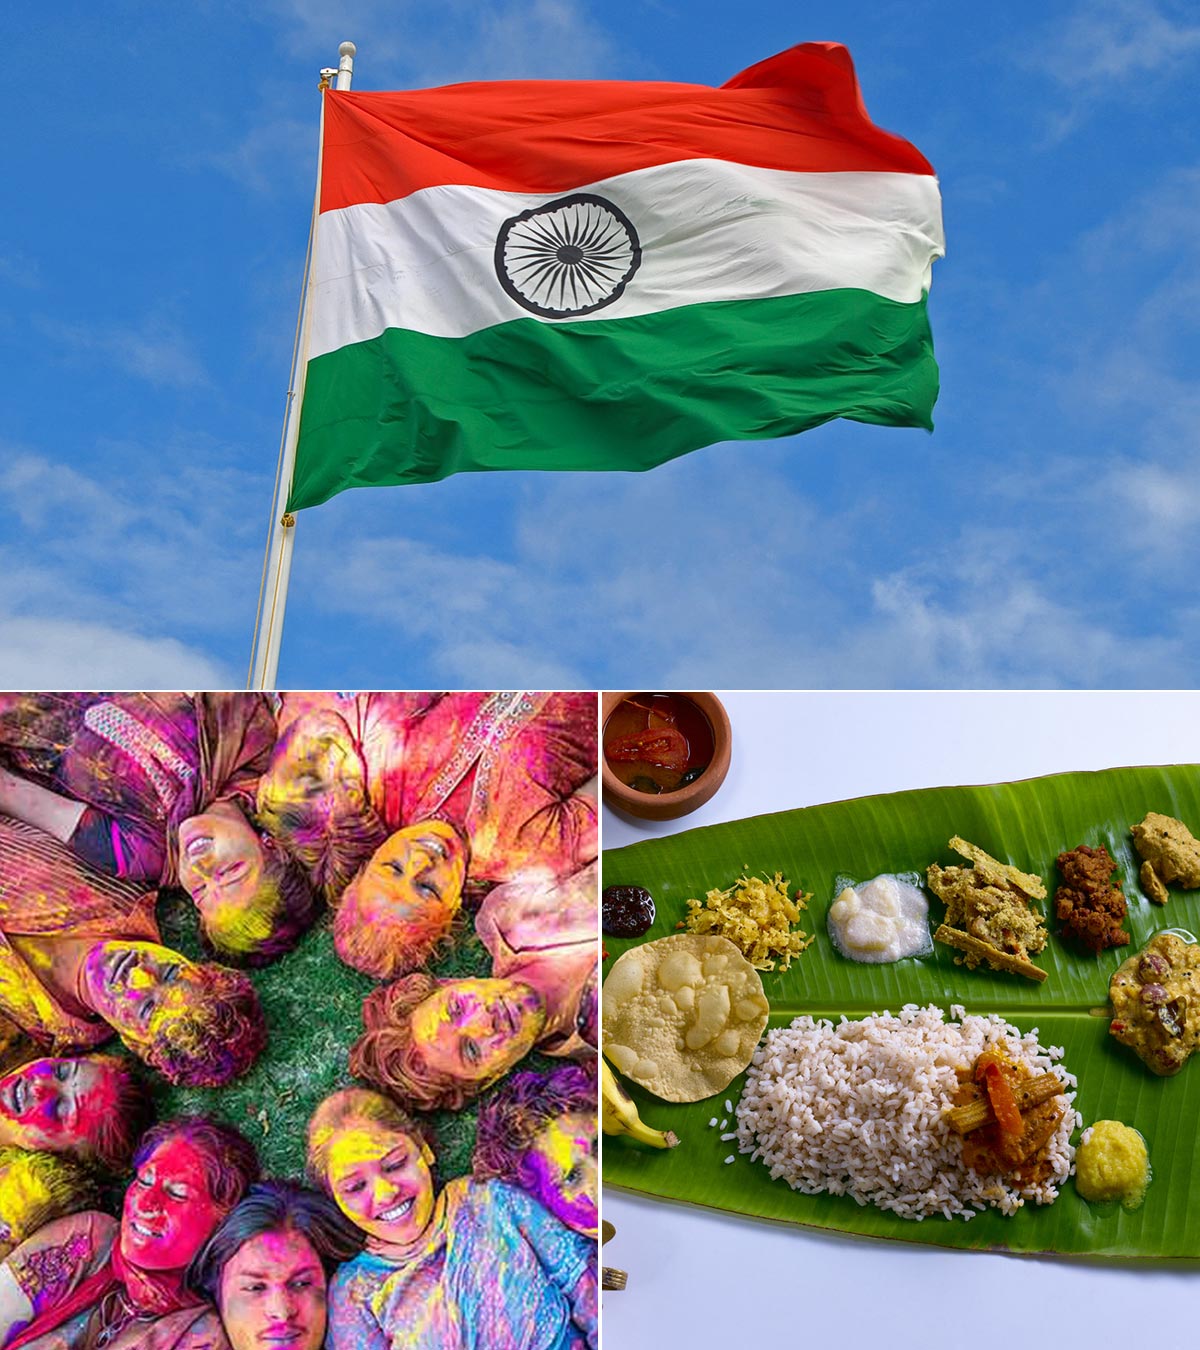 Indian culture, Indian flag, and Indian food